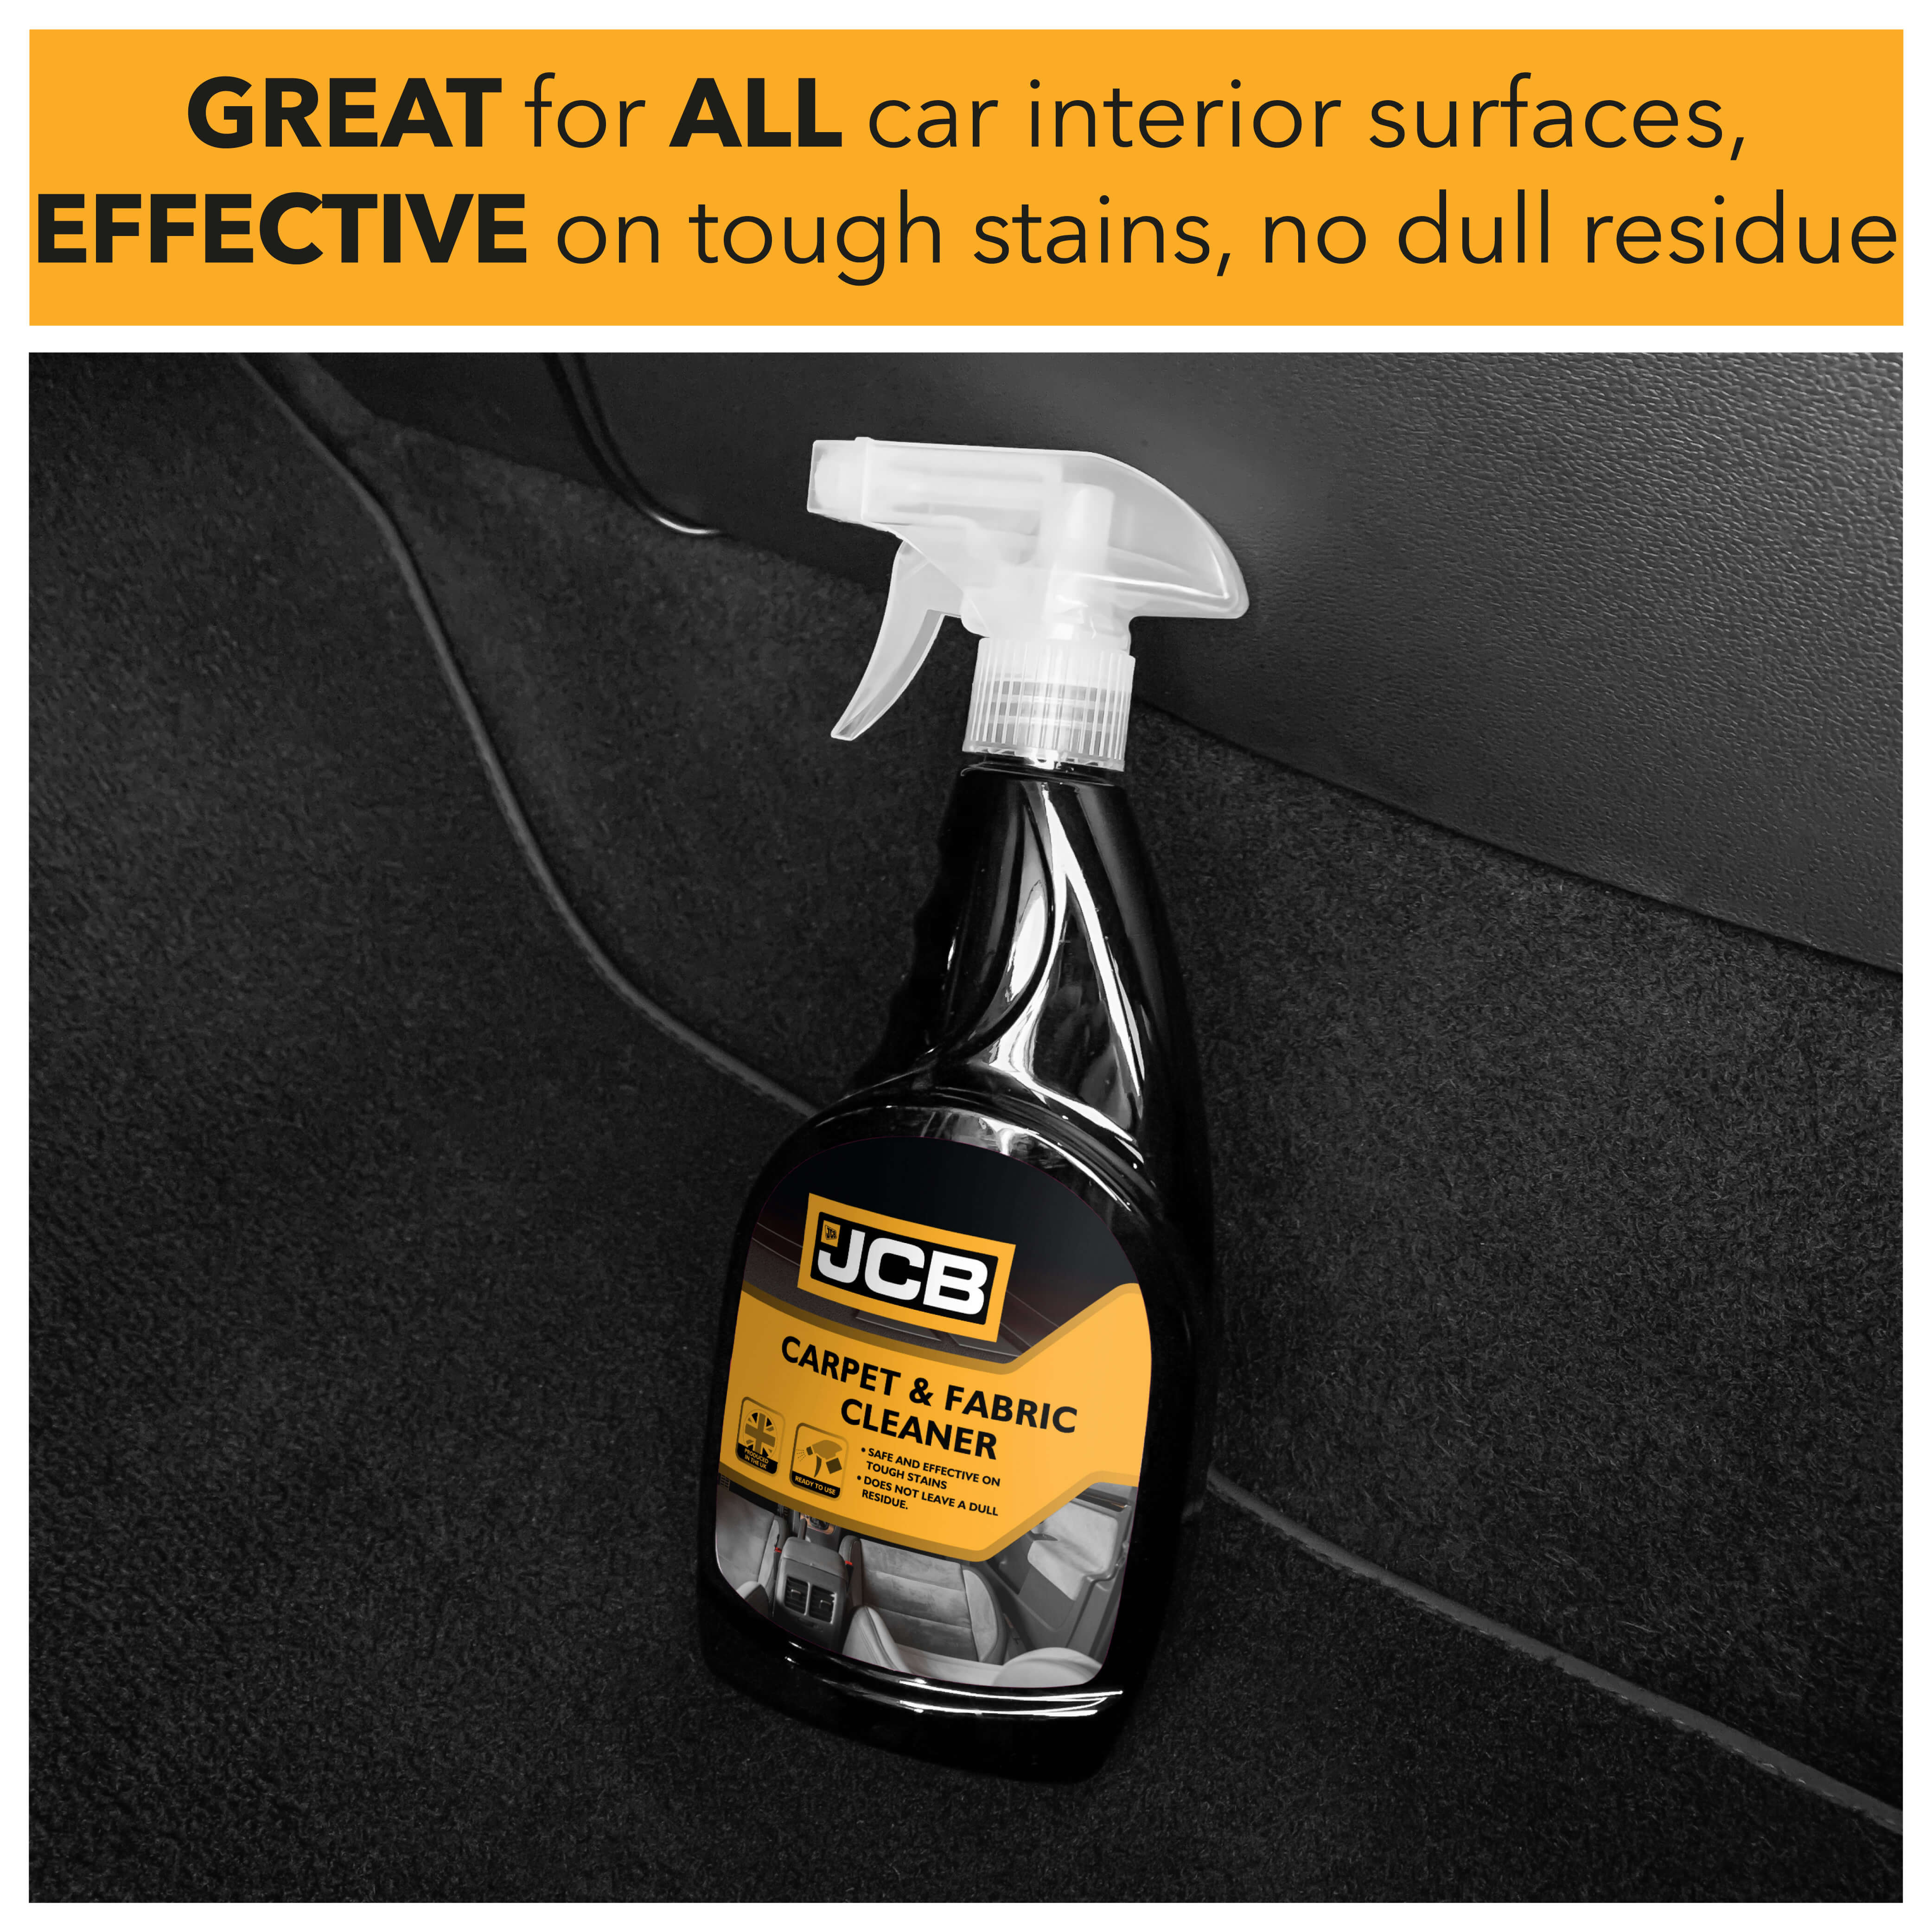 Great for all car interior surfaces, effective on tough stain, no dull residue